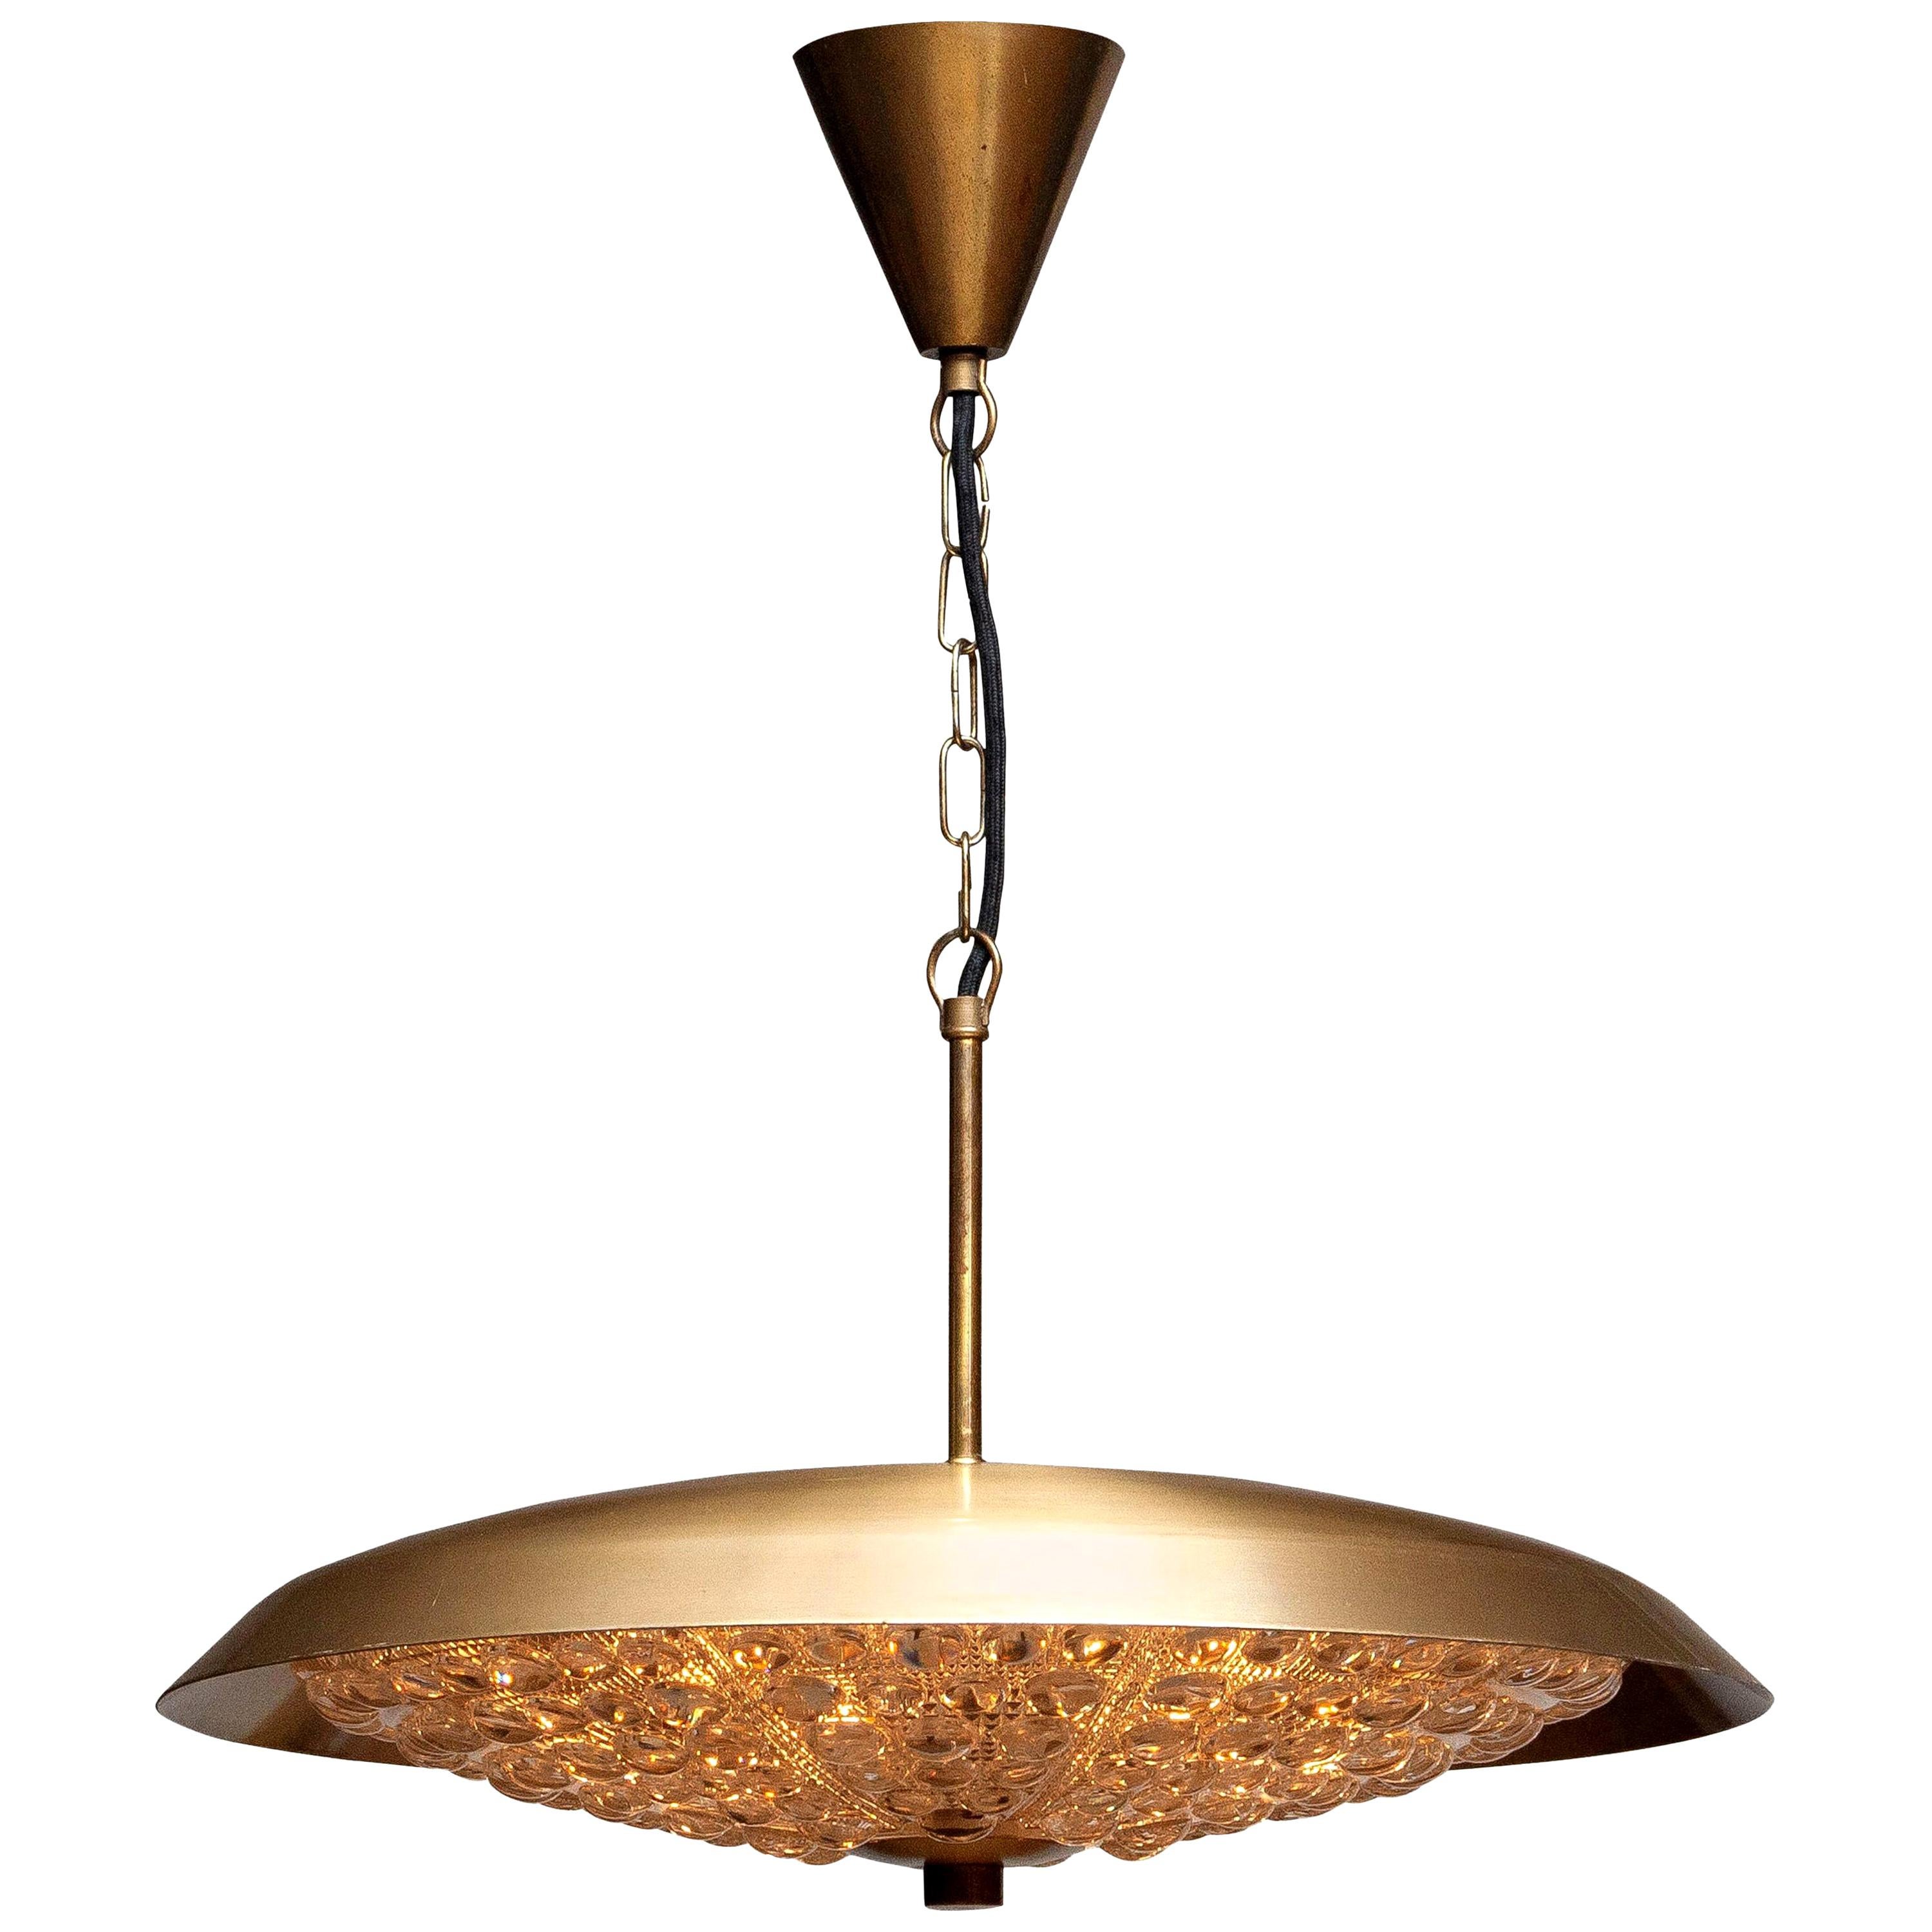 Mid-Century Modern 1950s, Brass and Glass Pendant Lamp Designed by Carl Fagerlund for Orrefors